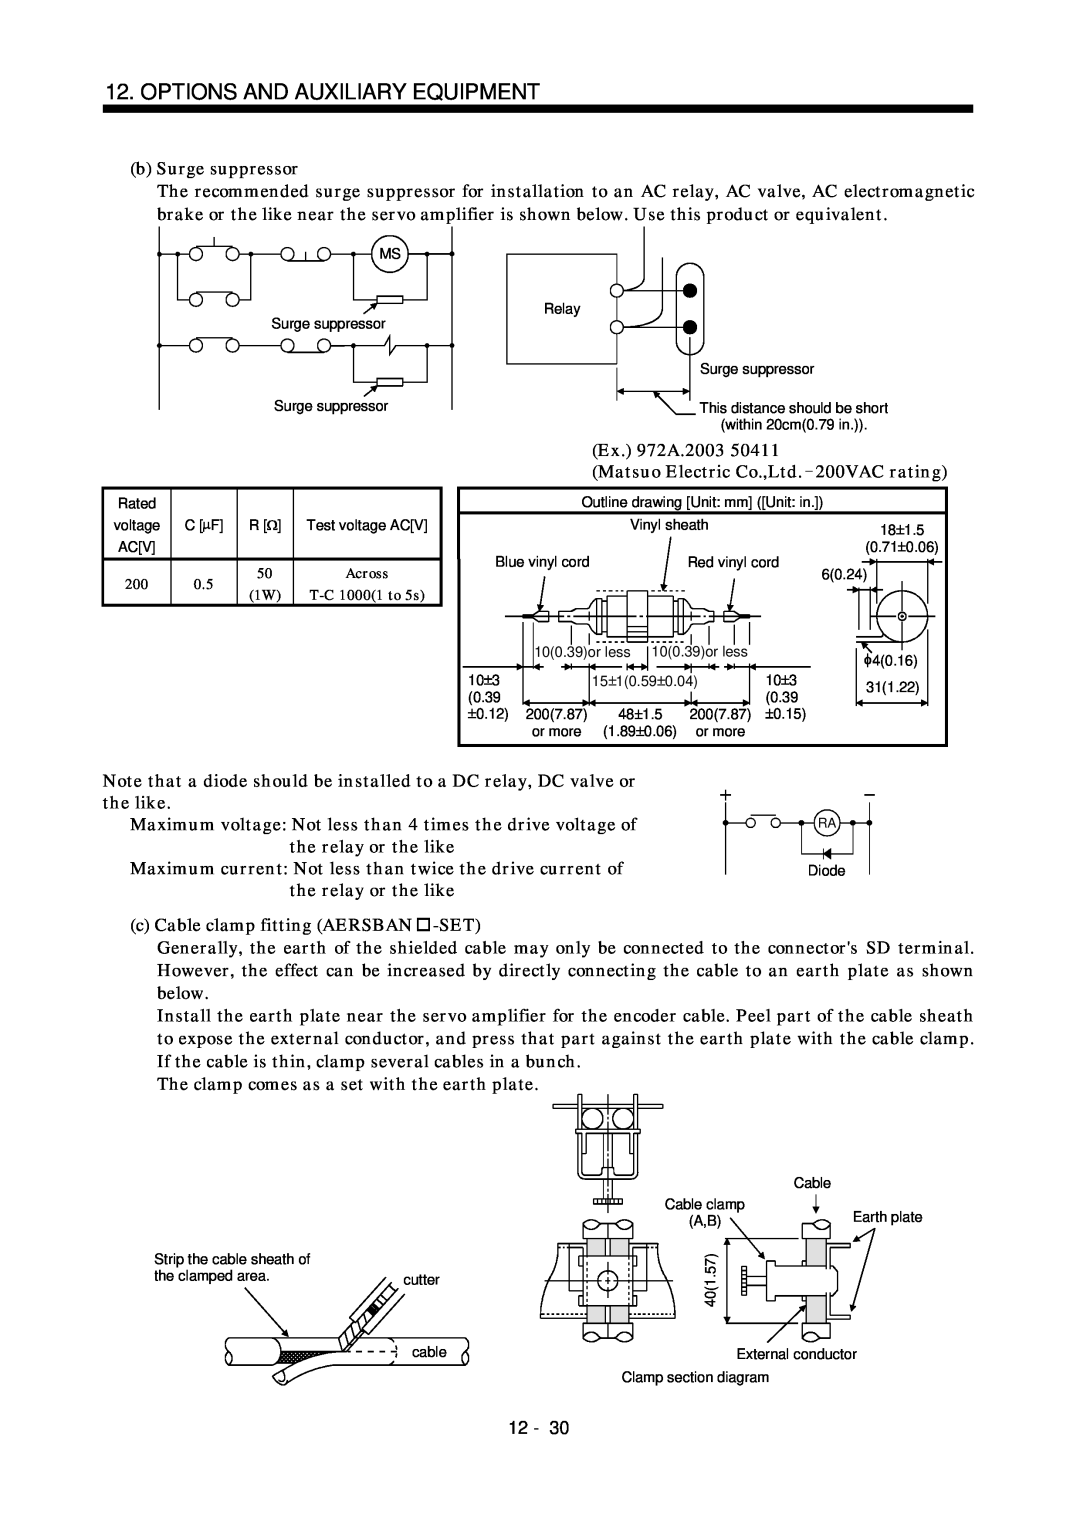 Bose MR-J2S- B instruction manual Options And Auxiliary Equipment, bSurge suppressor 